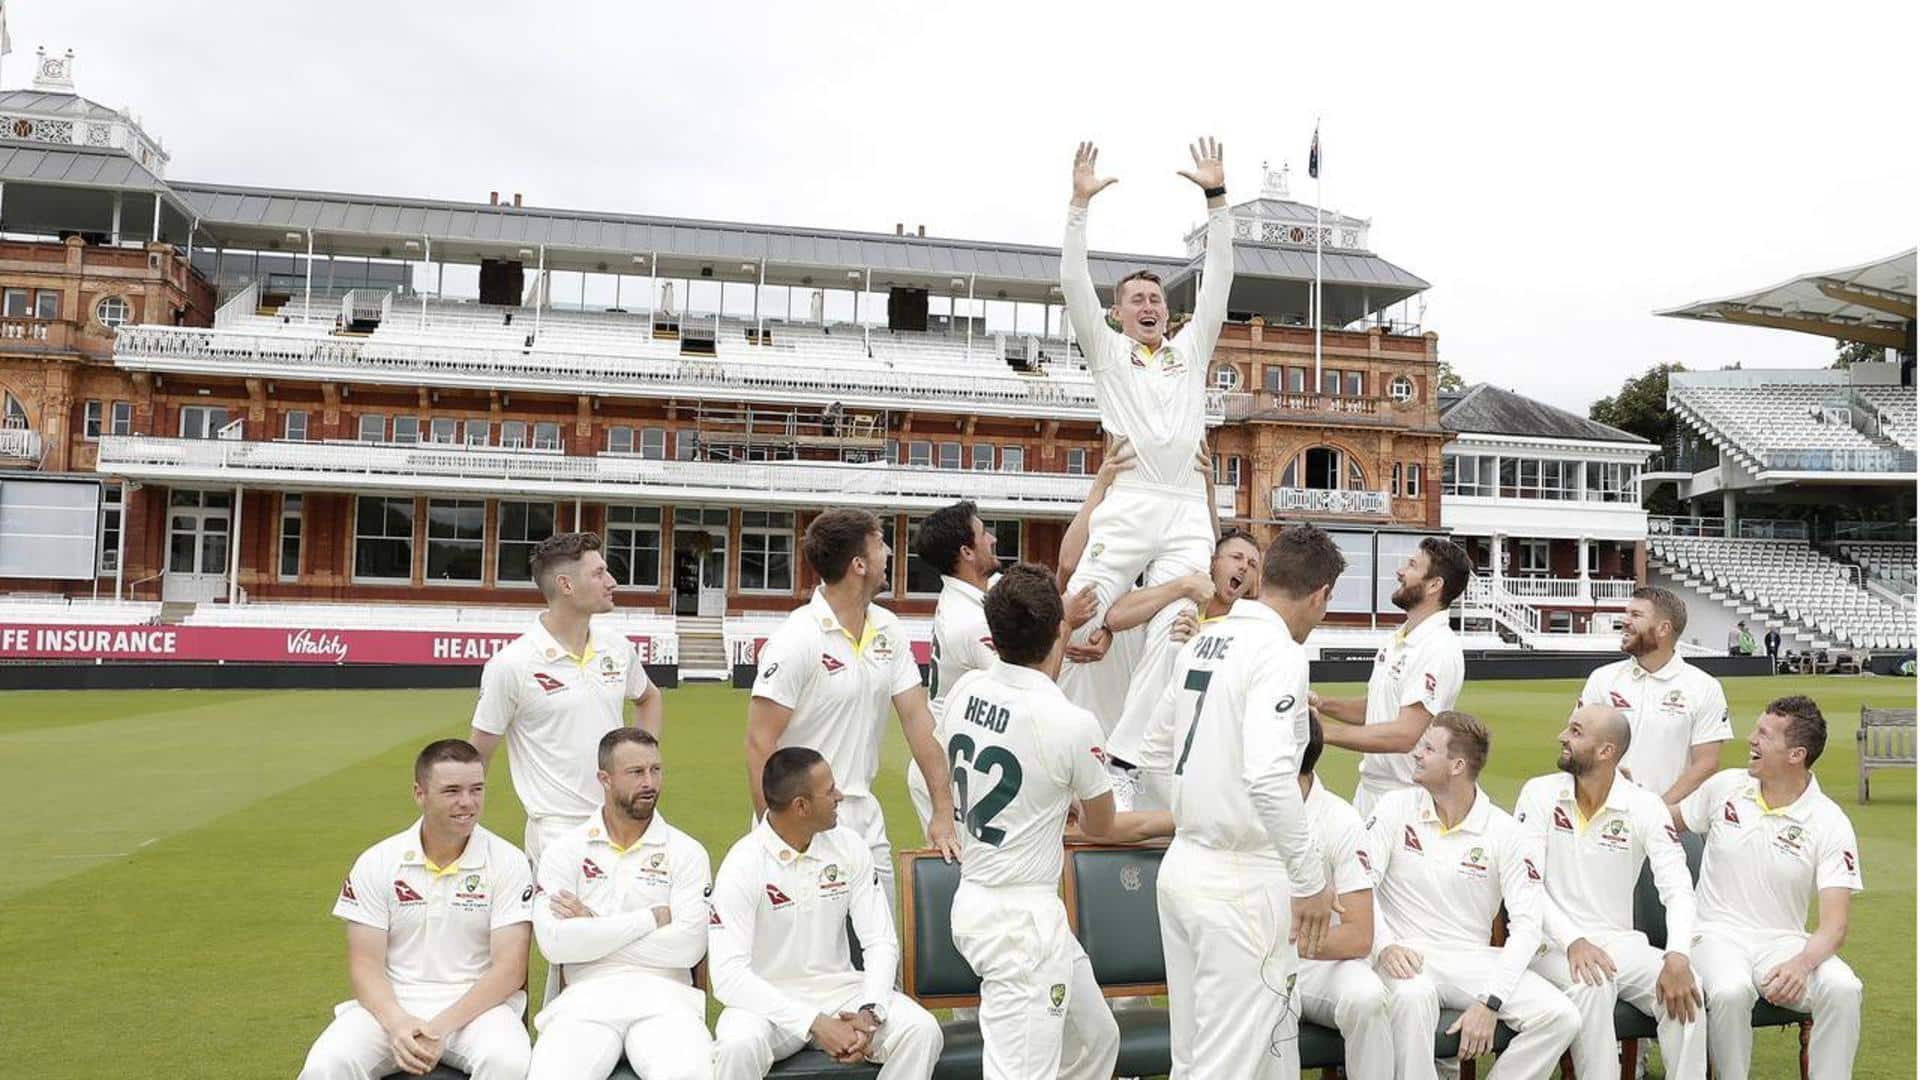 The Ashes: How have England and Australia fared at Lord's?